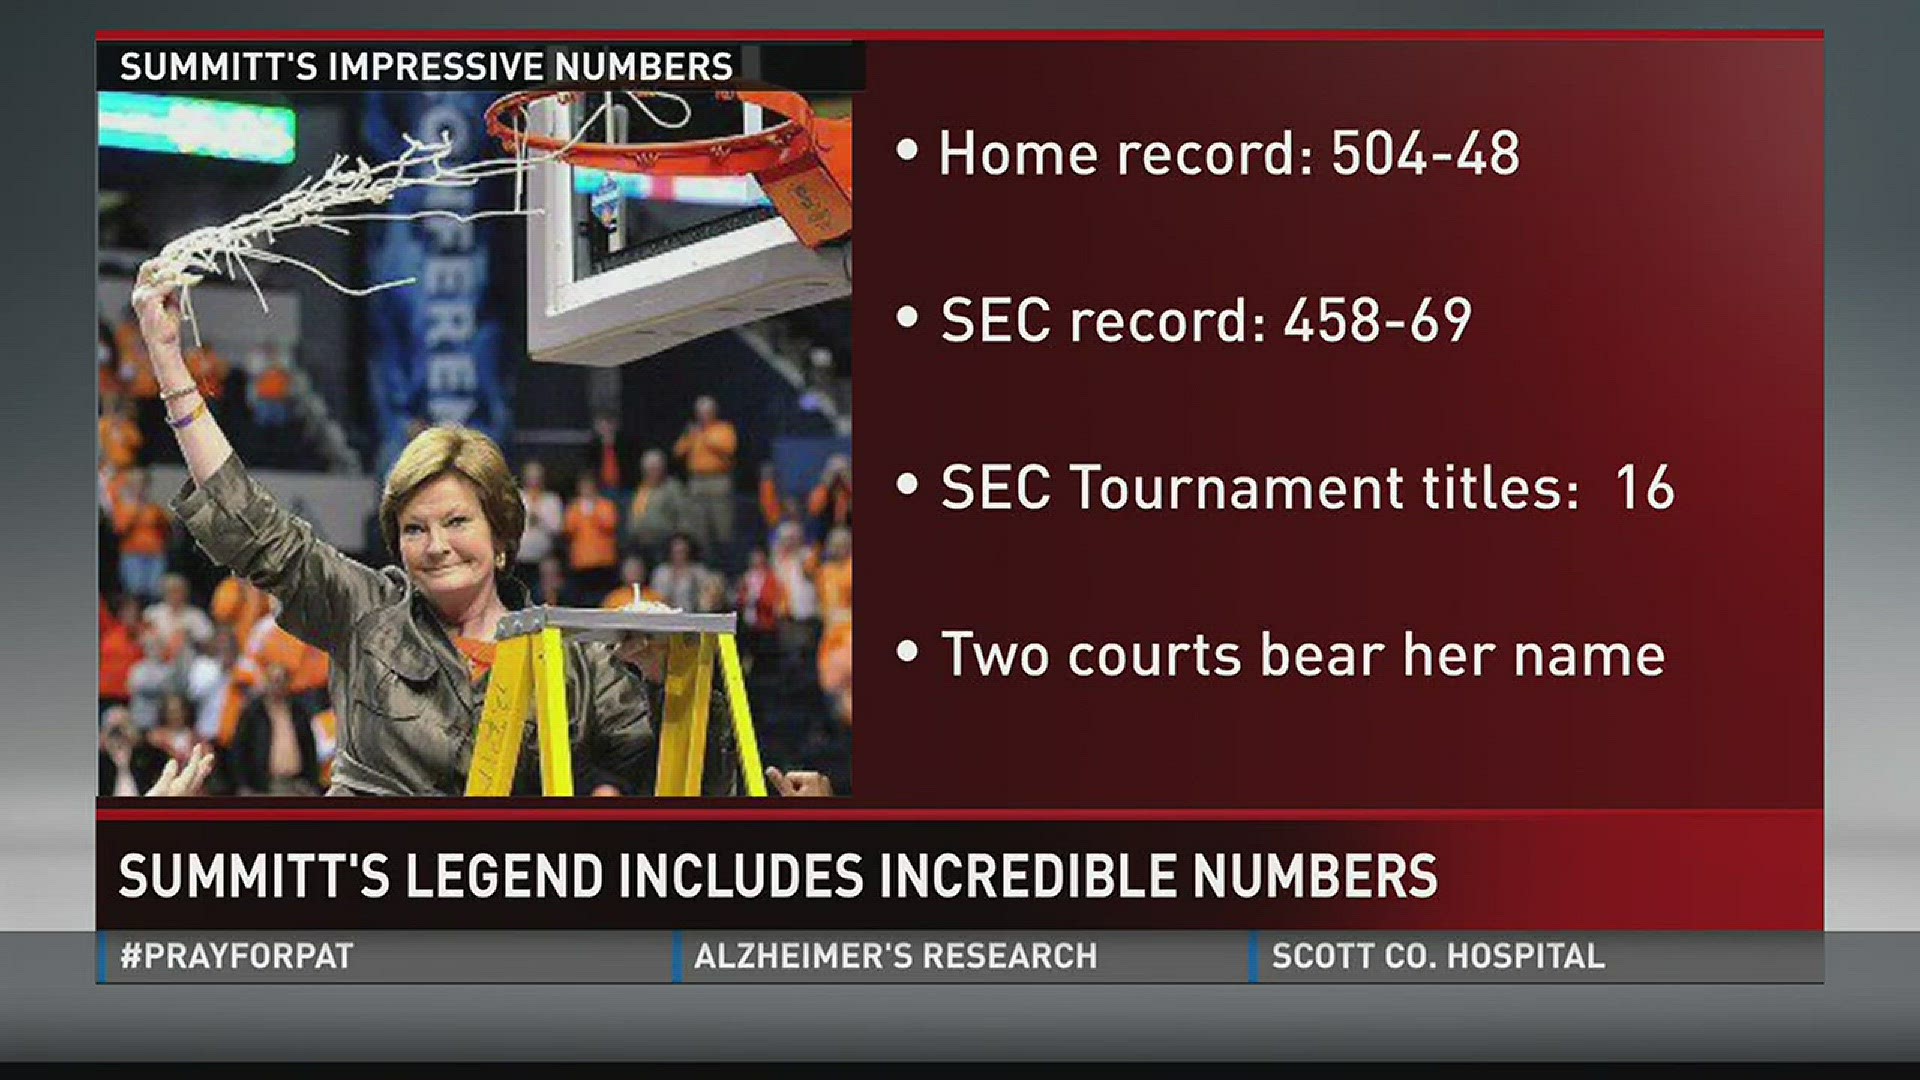 Former UT Lady Vols basketball coach and legend Pat Summitt holds 16 SEC tournament titles, among other records.